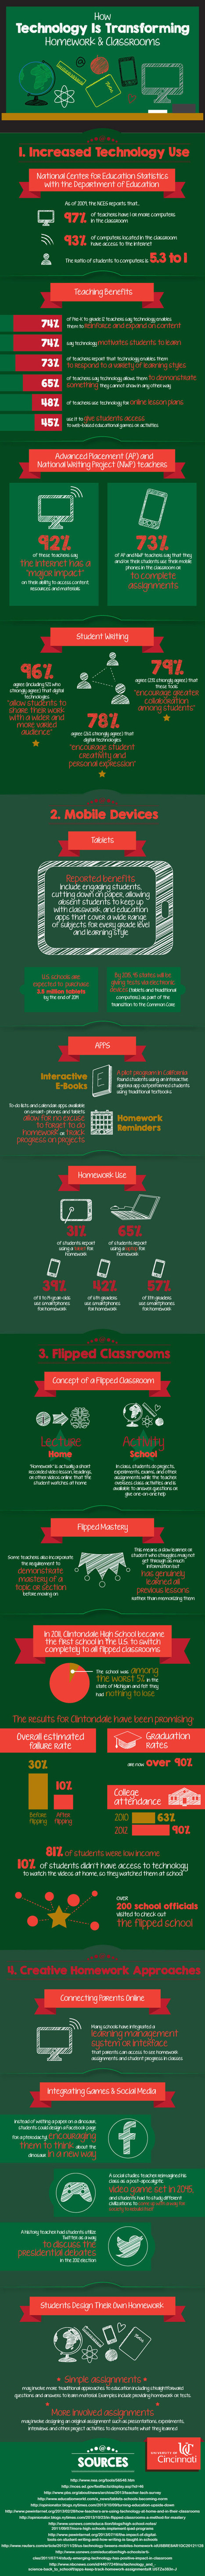 Trends | How Technology is Changing the Classroom | Strictly pedagogical | Scoop.it